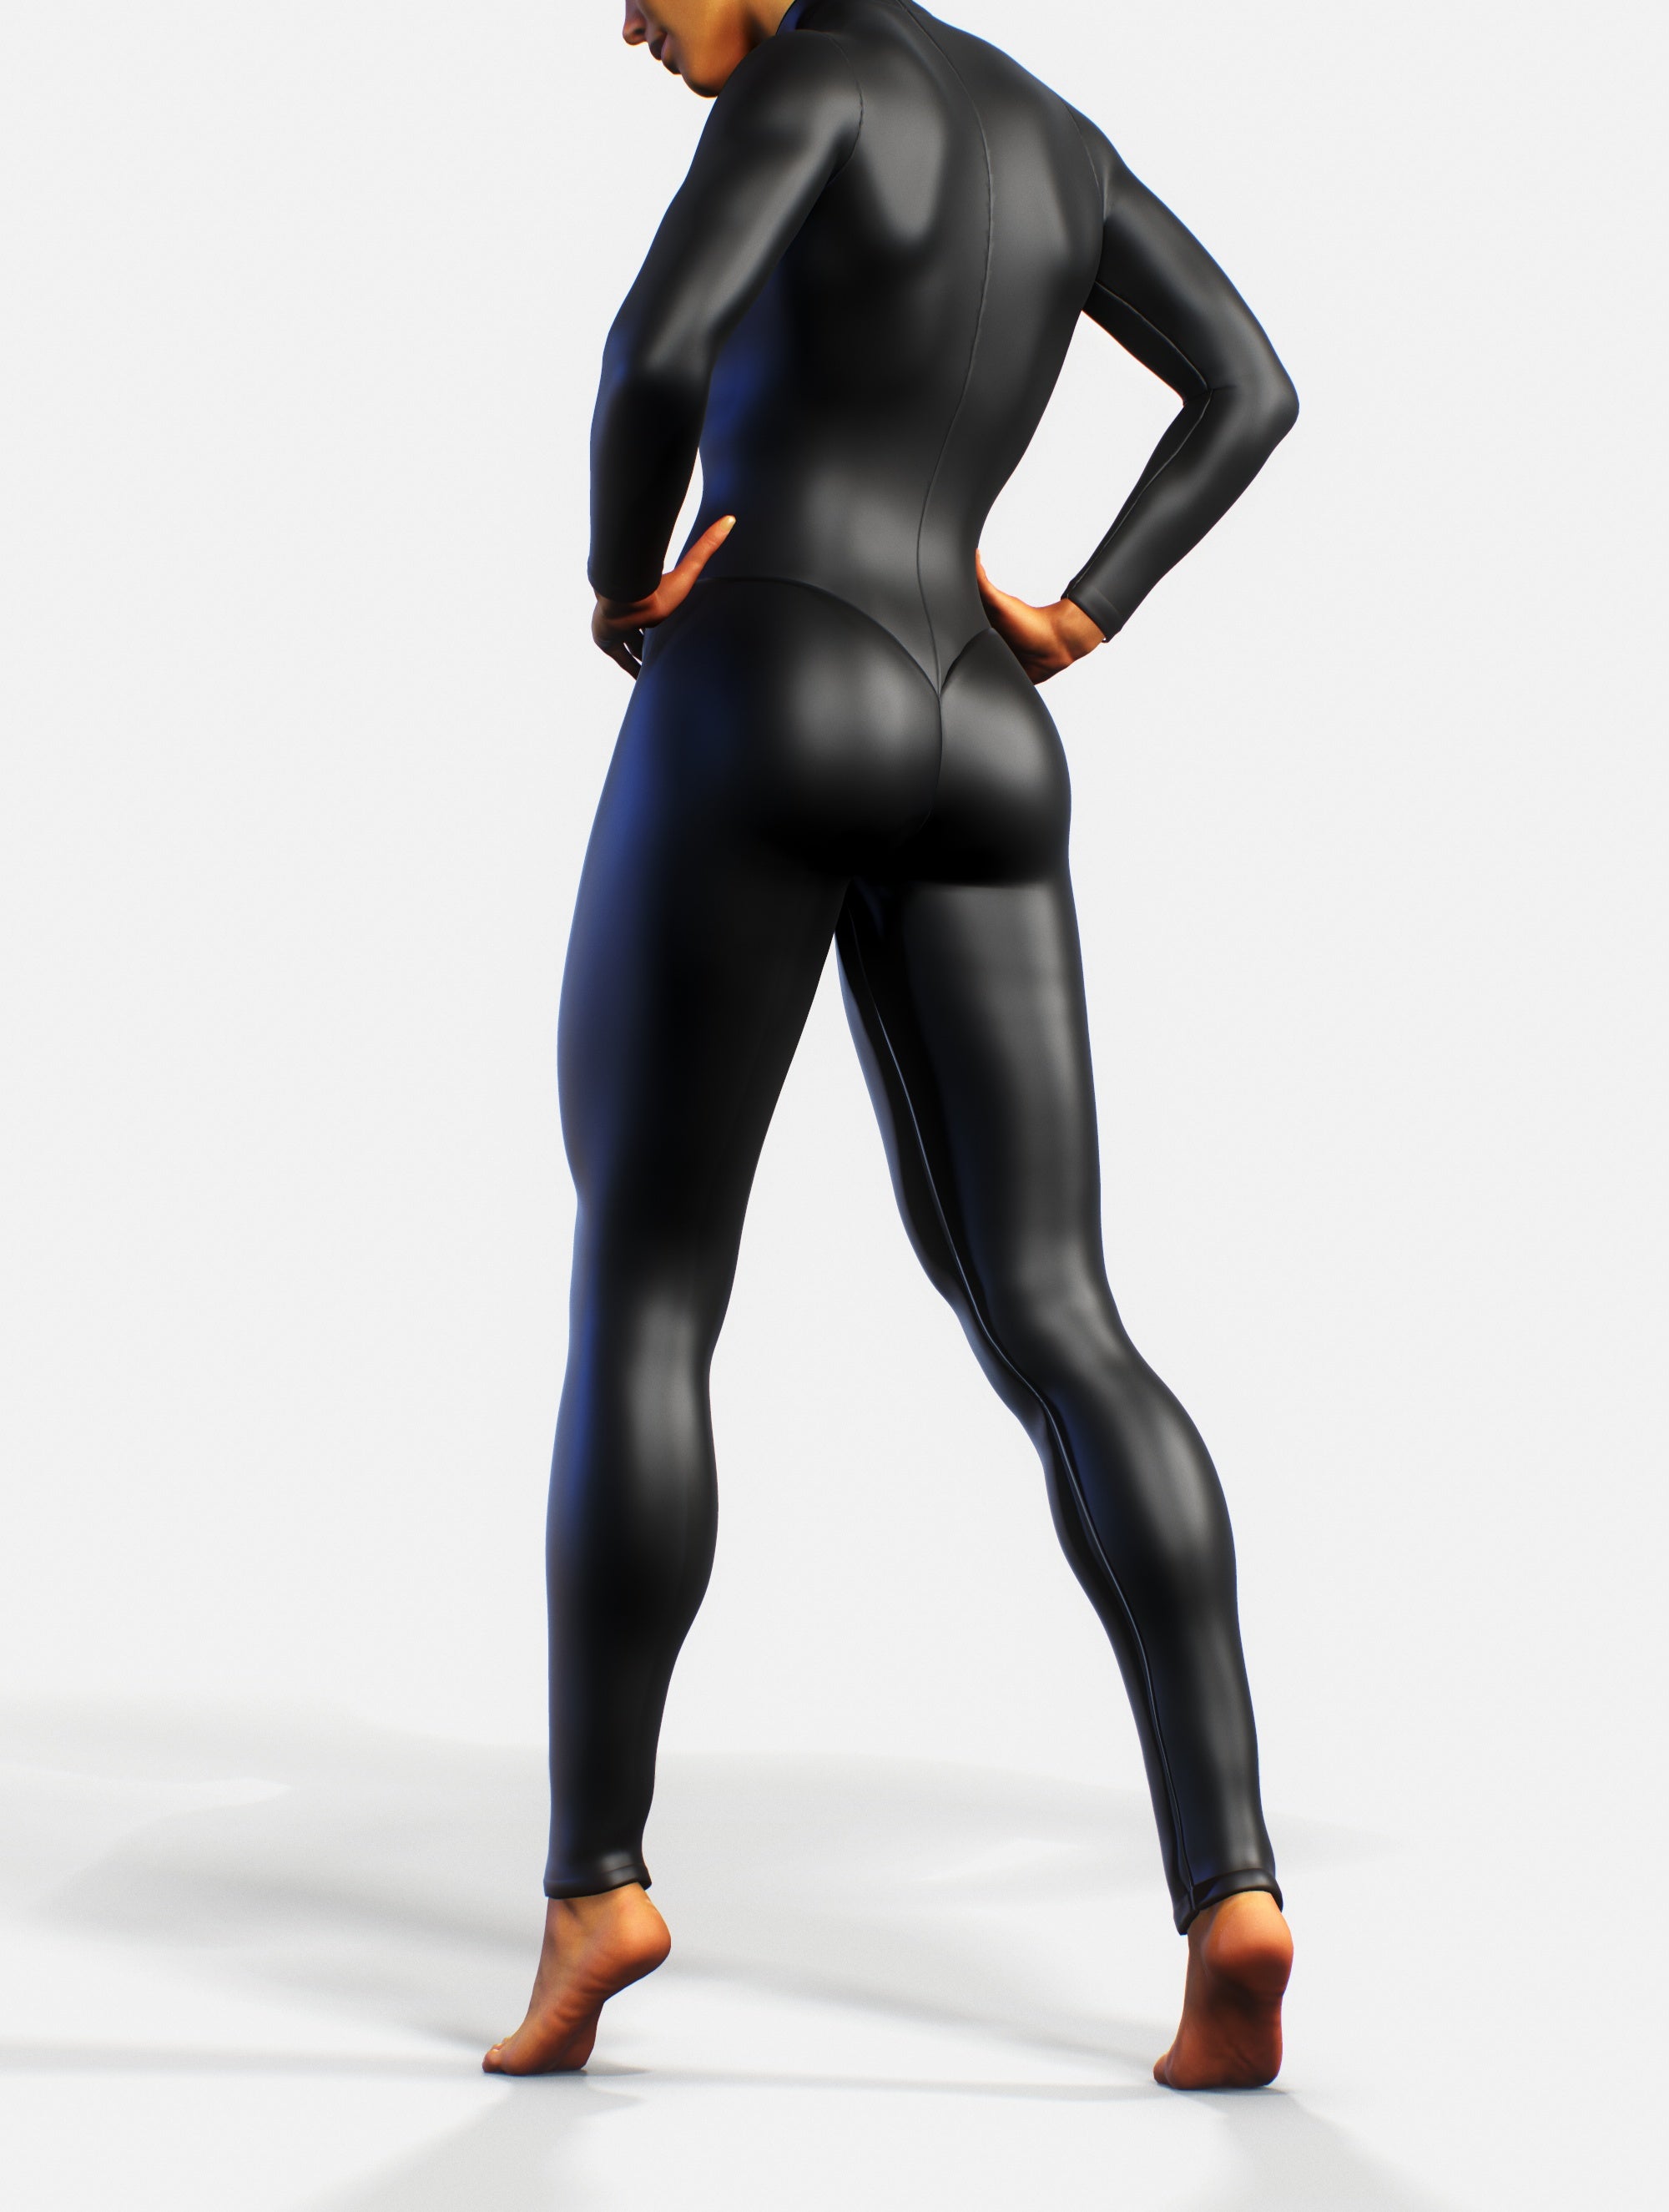 BDSM Concepts. Back View of Caucasian Female in Sexy Leather Bodysuit  Prepared for Sado-Masochism Play. Pulling Pants Off the Buttocks. Over  Black. Stock Photo